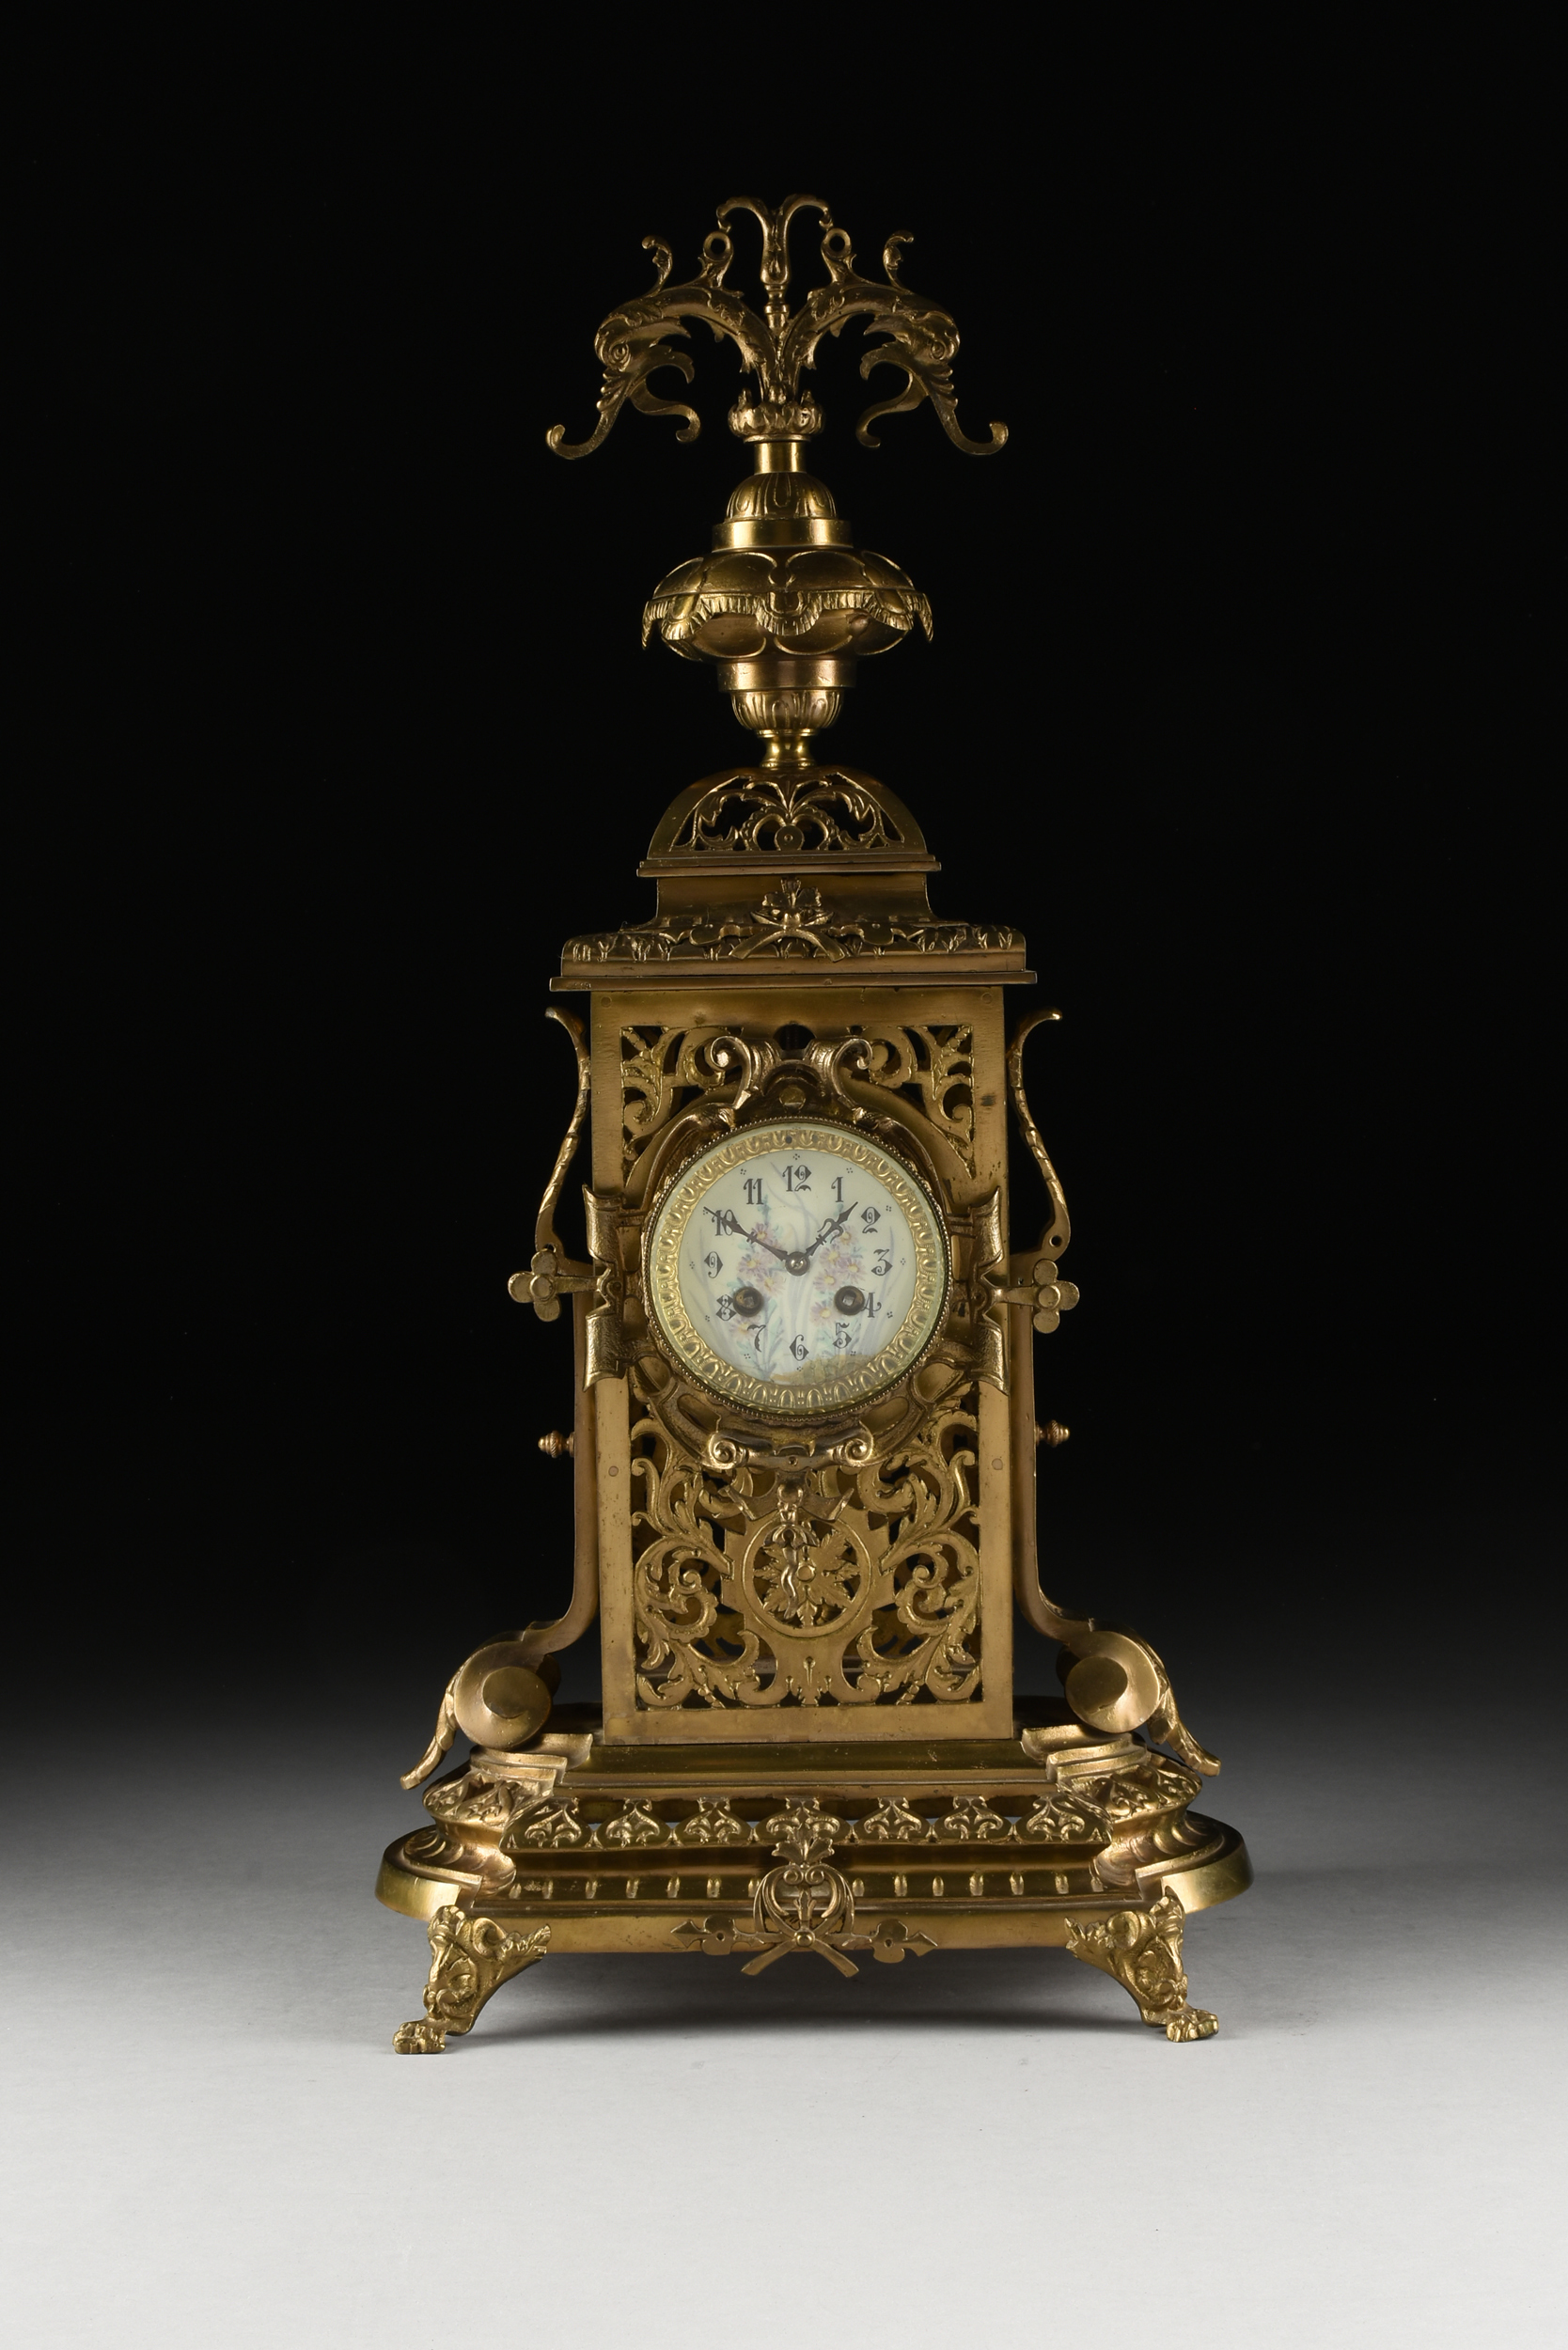 A RENAISSANCE REVIVAL GILT BRONZE MANTLE CLOCK, FRENCH, LATE 19TH CENTURY, the finial cast as - Image 2 of 12